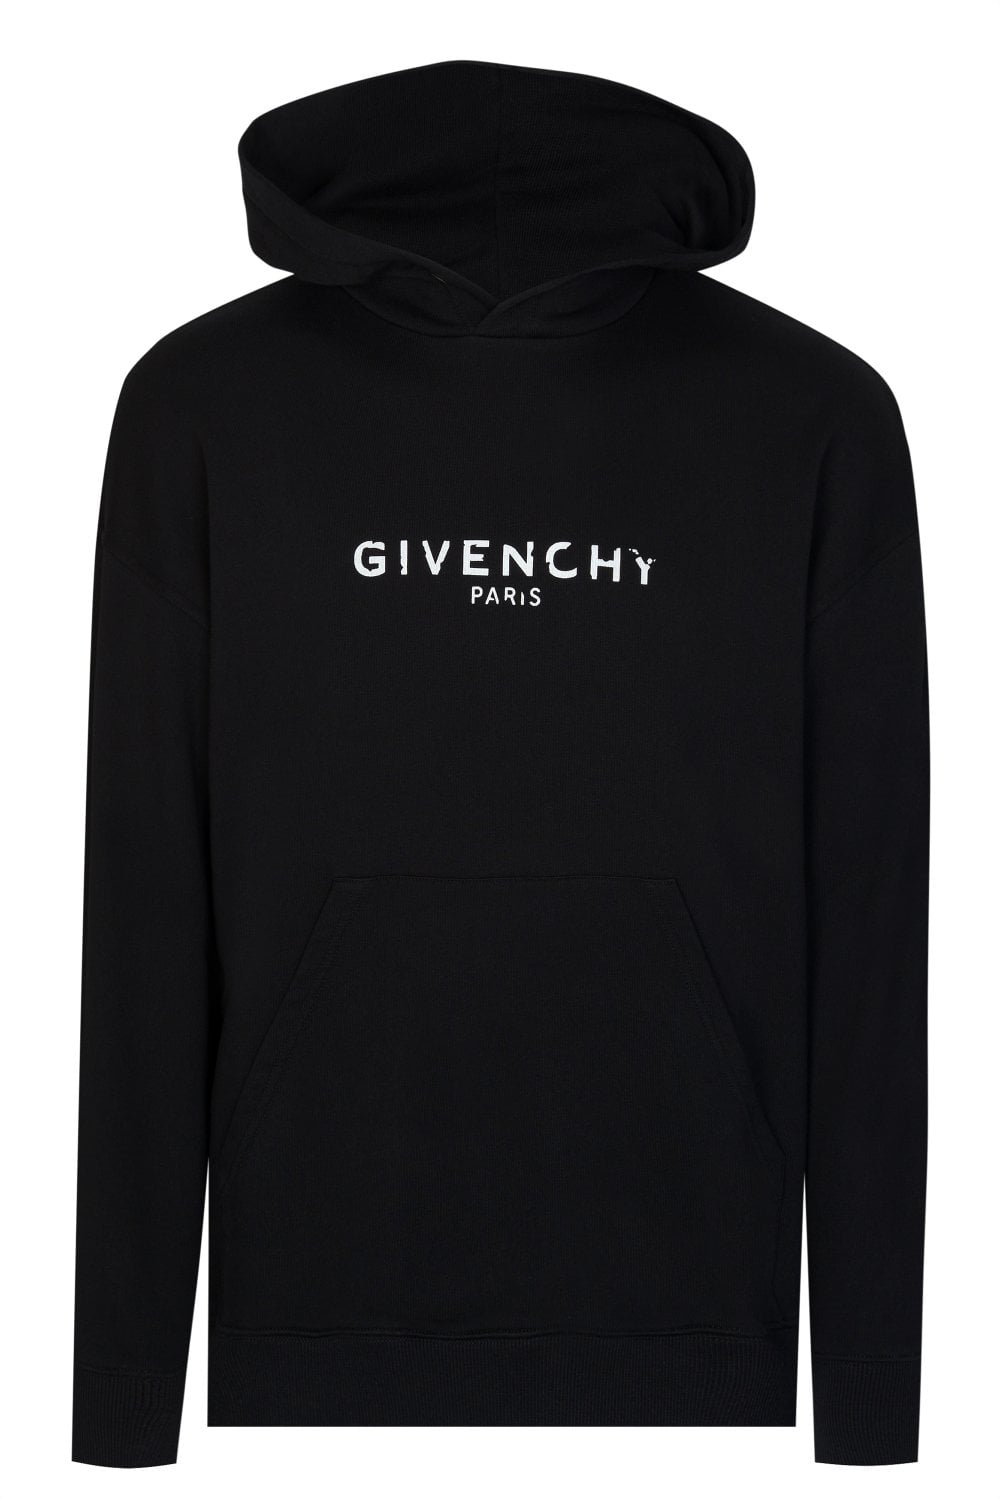 Givenchy Paris Logo - GIVENCHY Givenchy Paris Logo Hooded Sweatshirt - Clothing from ...